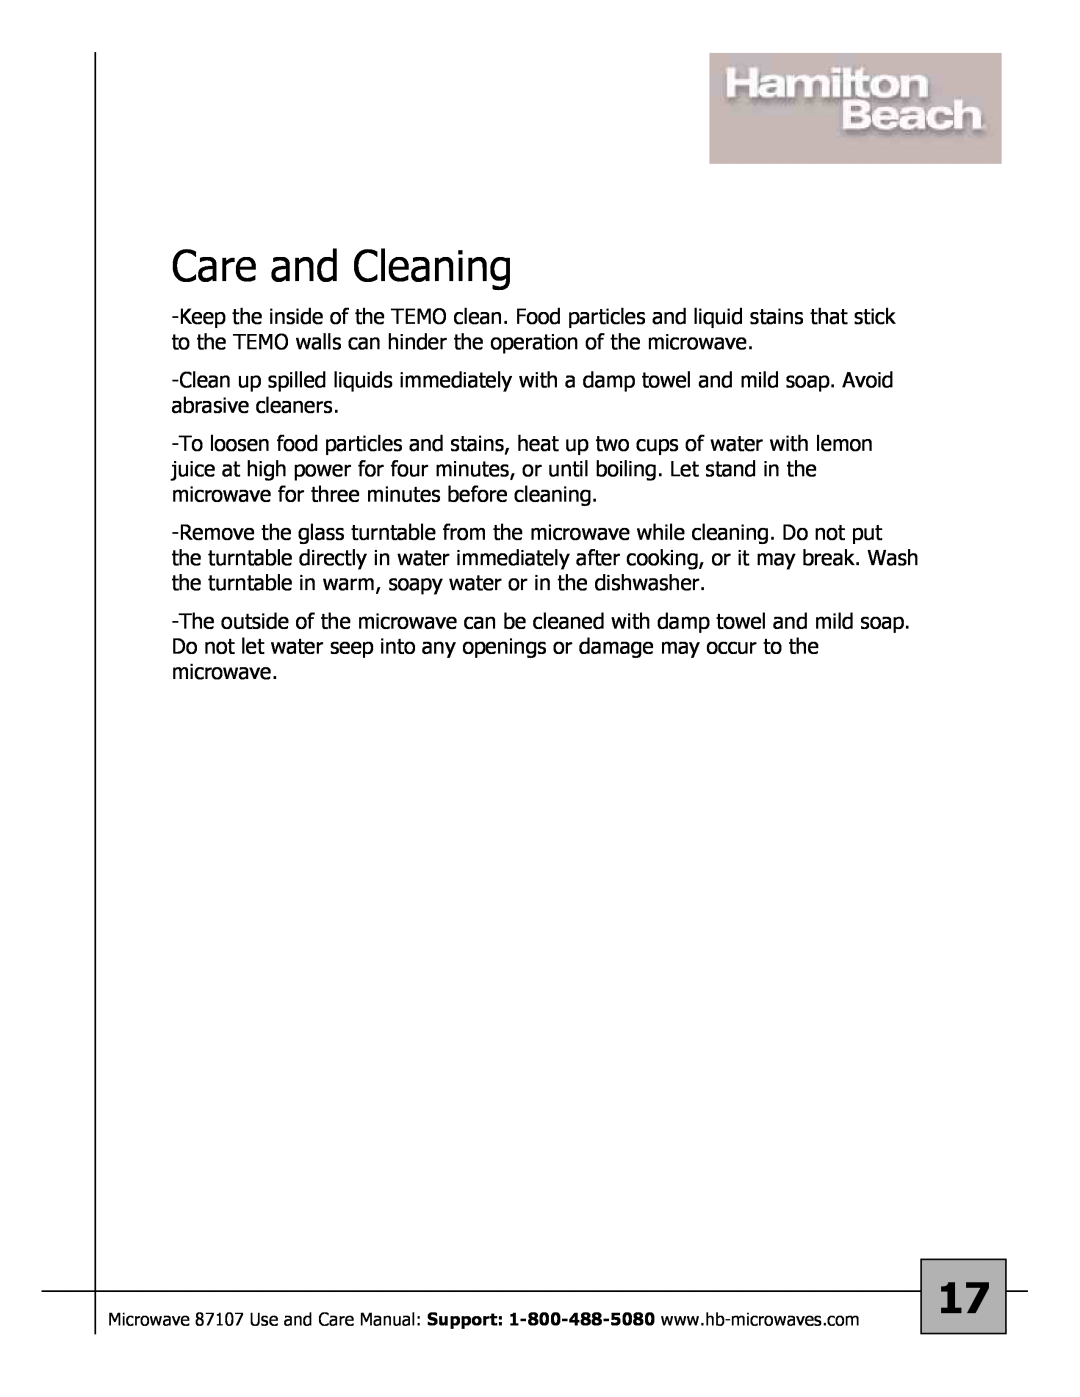 Hamilton Beach 87107 owner manual Care and Cleaning 